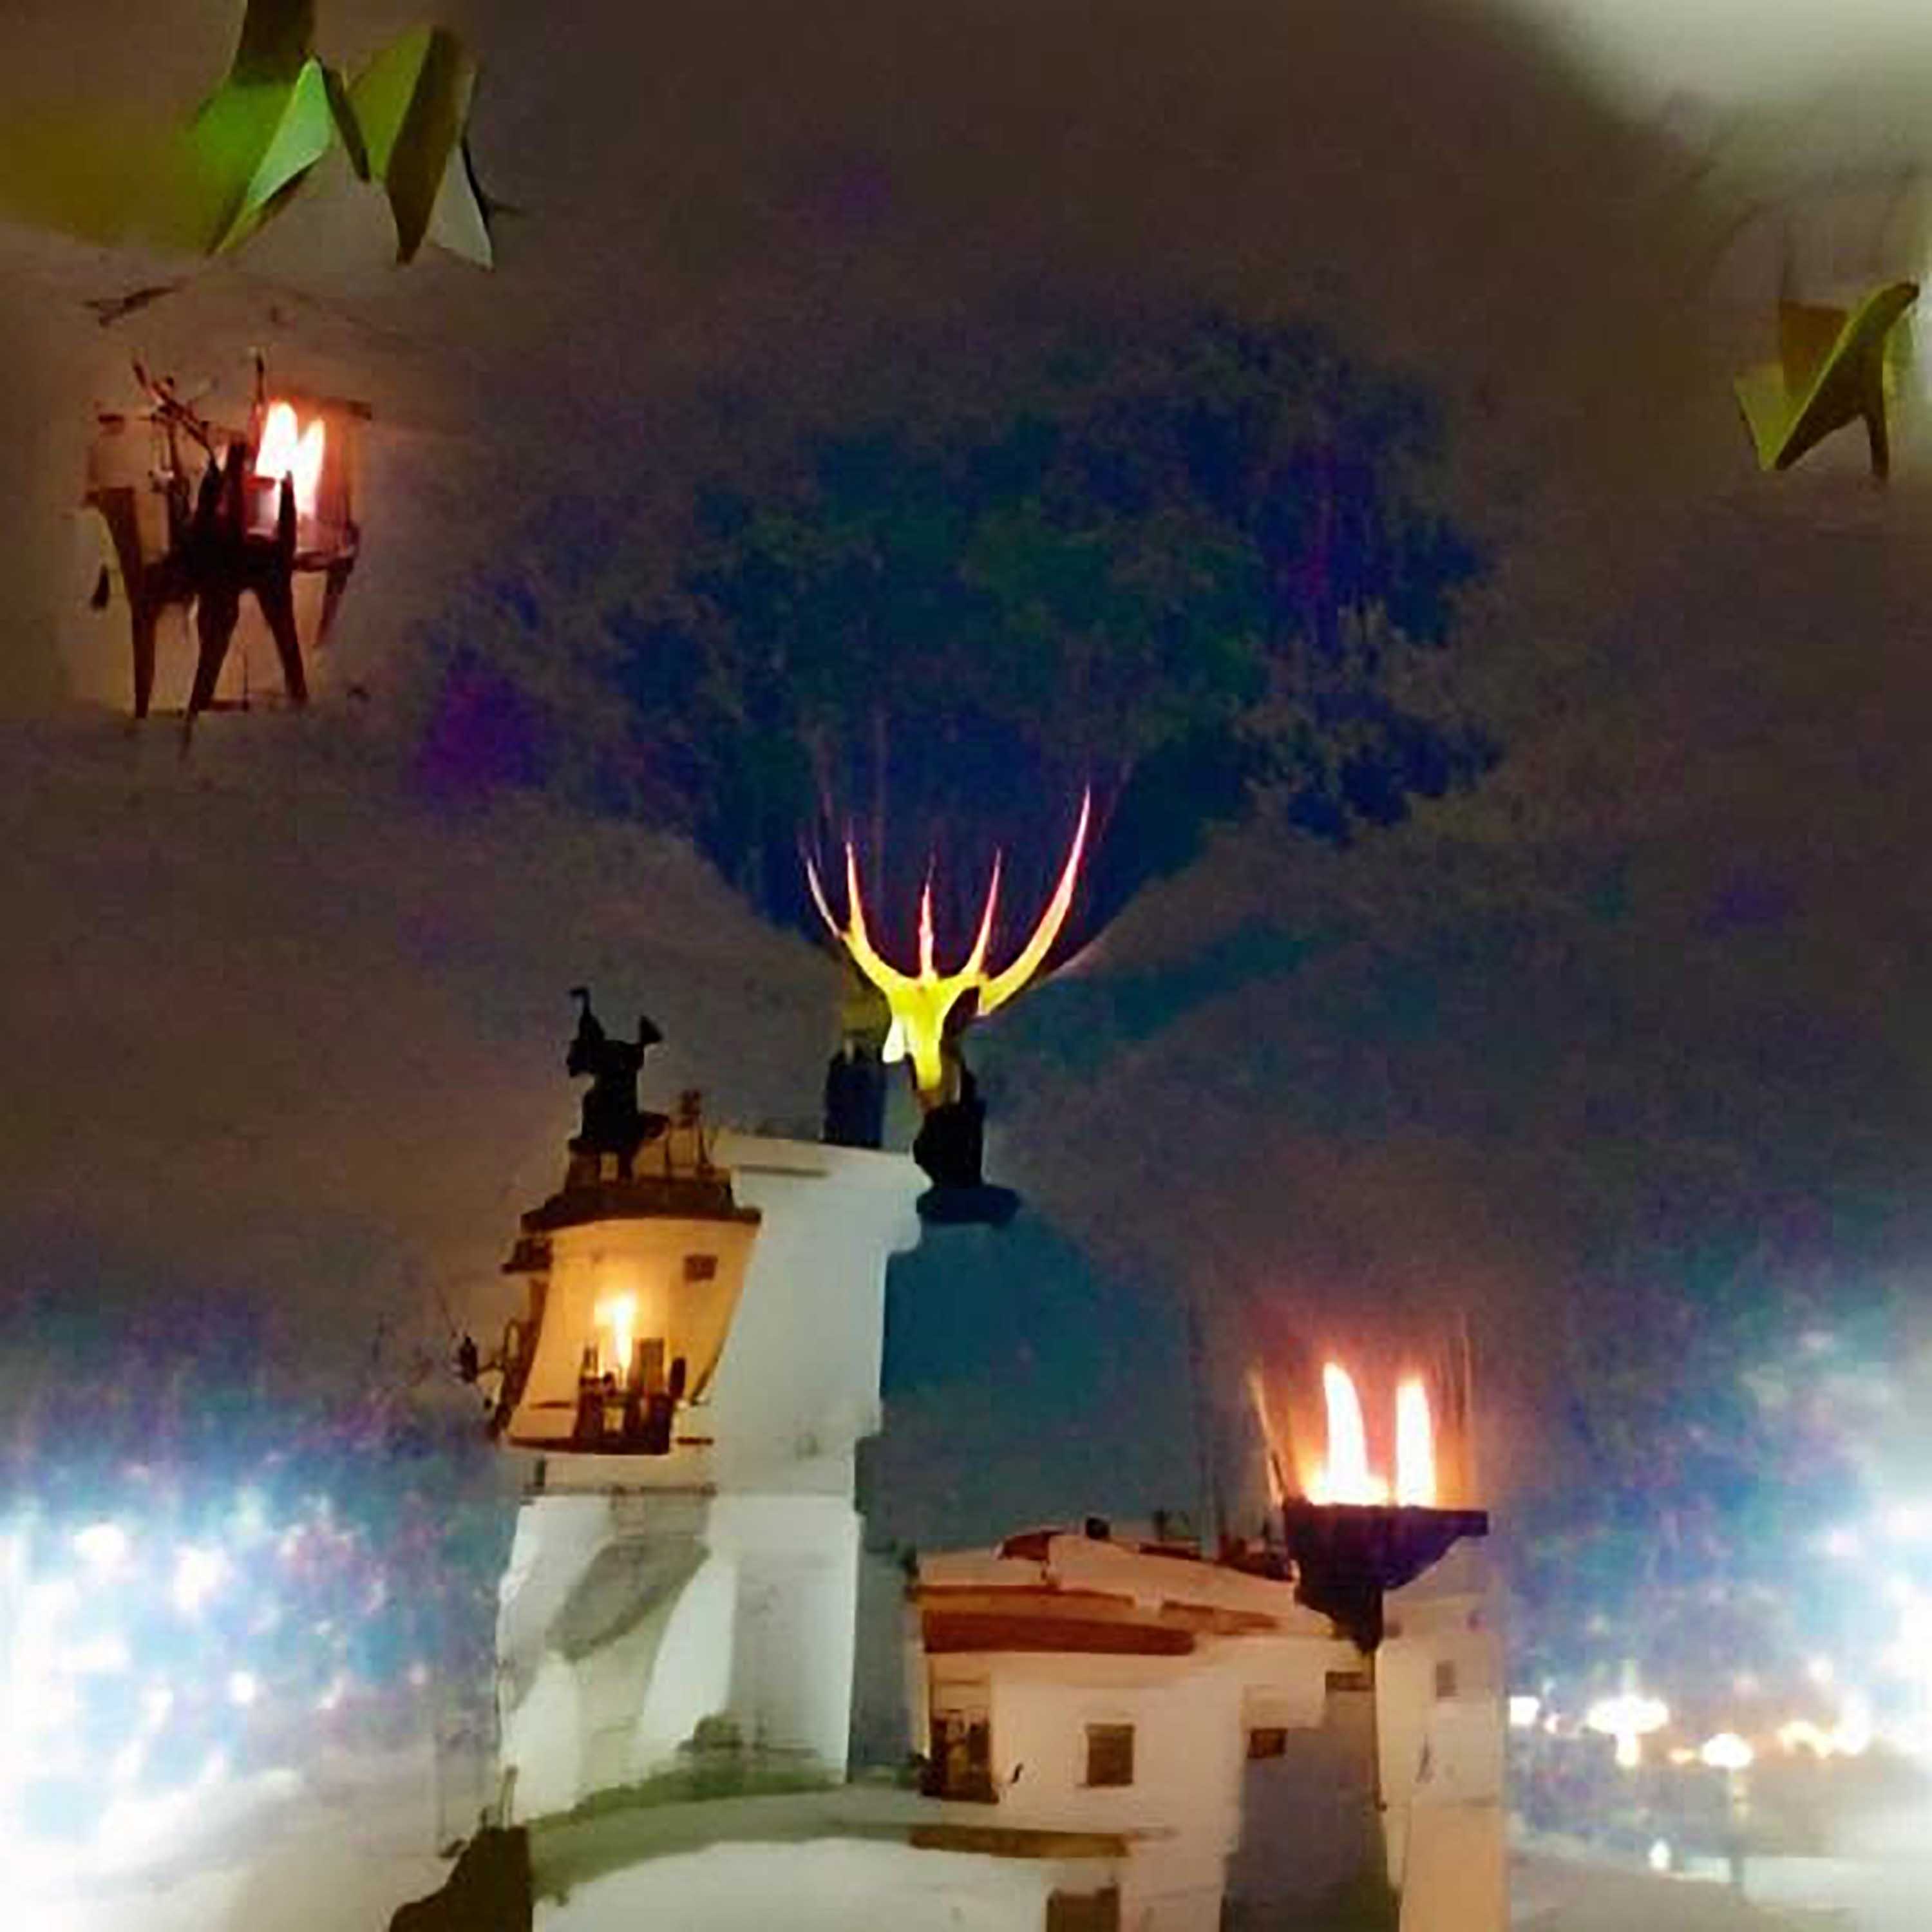 #11 - "We're igniting the lantern of the Fátima Lady, outstretch my antlers at the cantina, crazy buzz in the breeze"